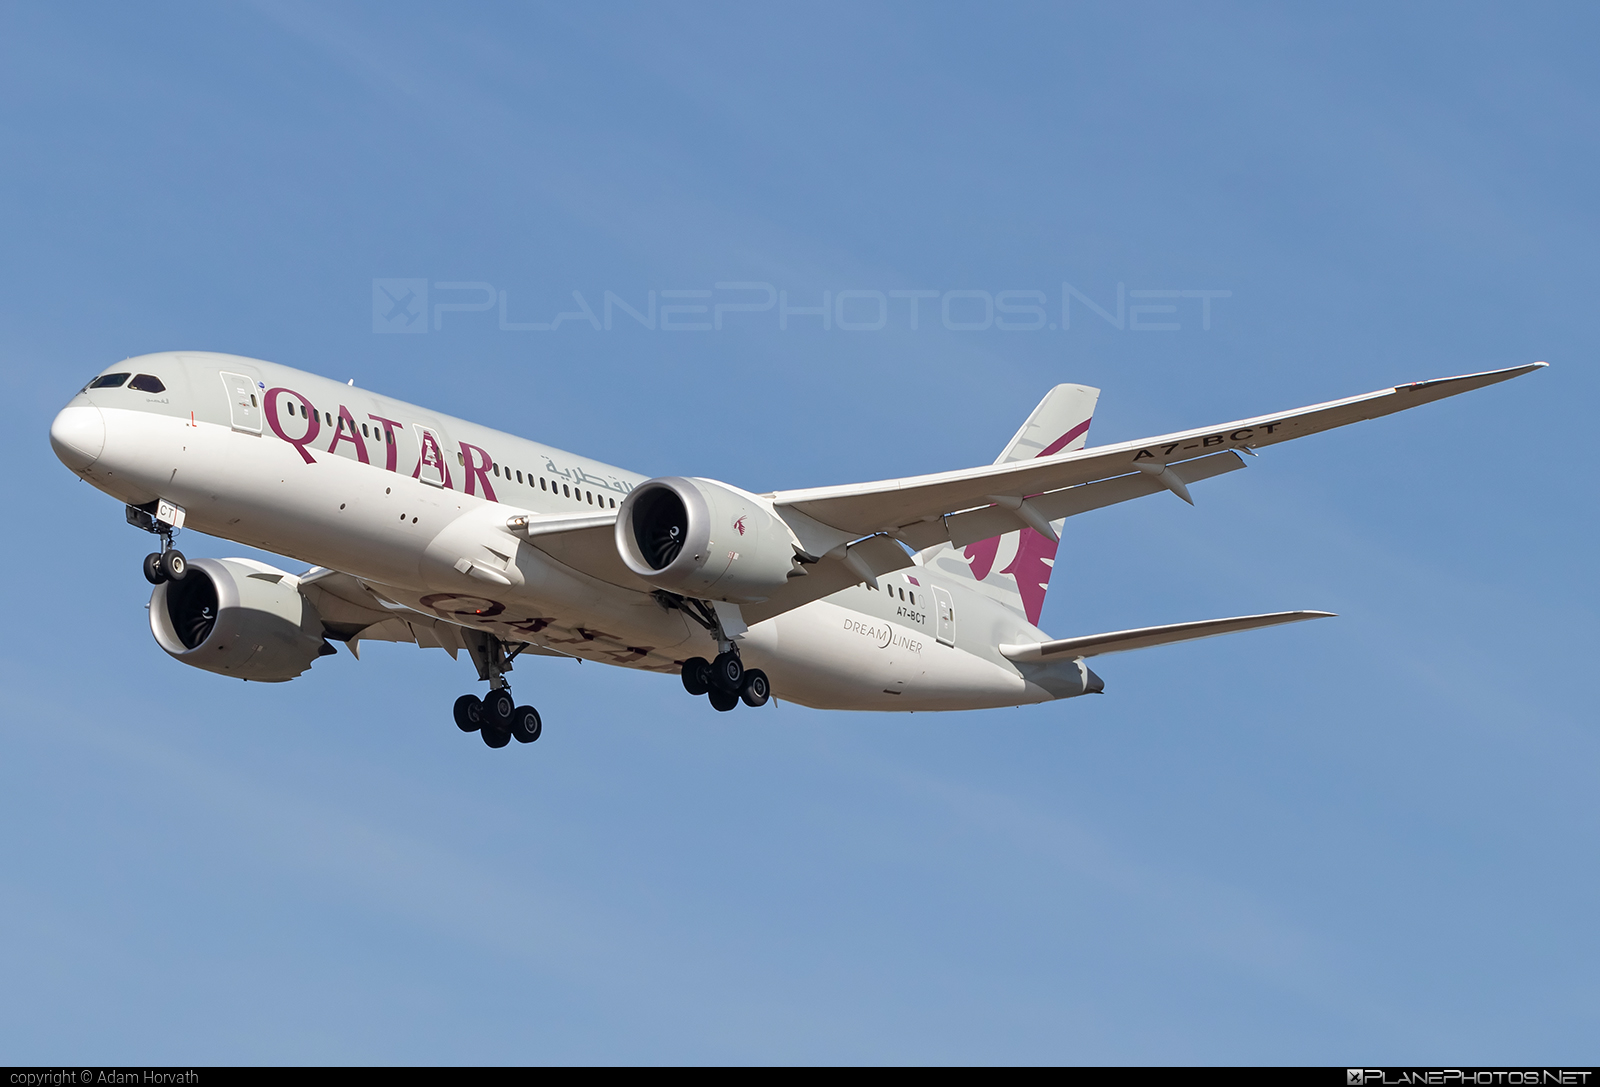 Boeing 787-8 Dreamliner - A7-BCT operated by Qatar Airways #b787 #boeing #boeing787 #dreamliner #qatarairways